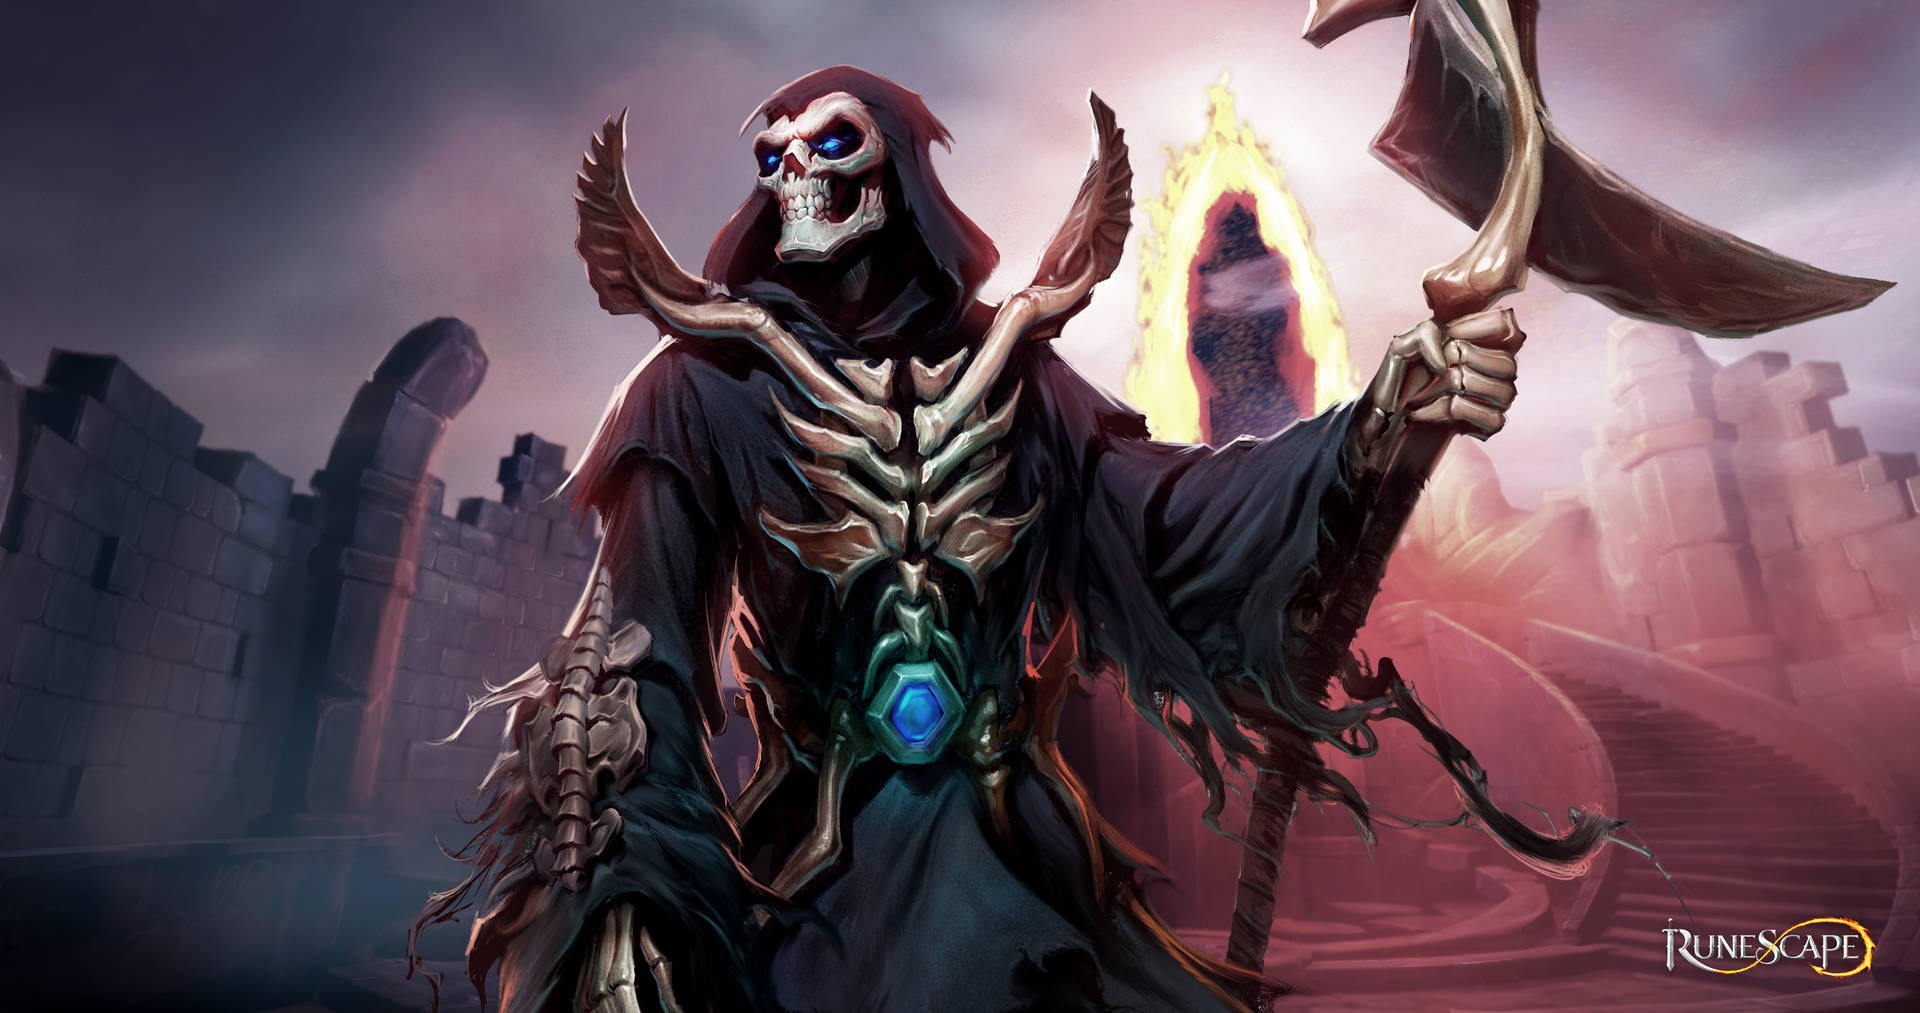 Runescape Scary Character Wallpaper